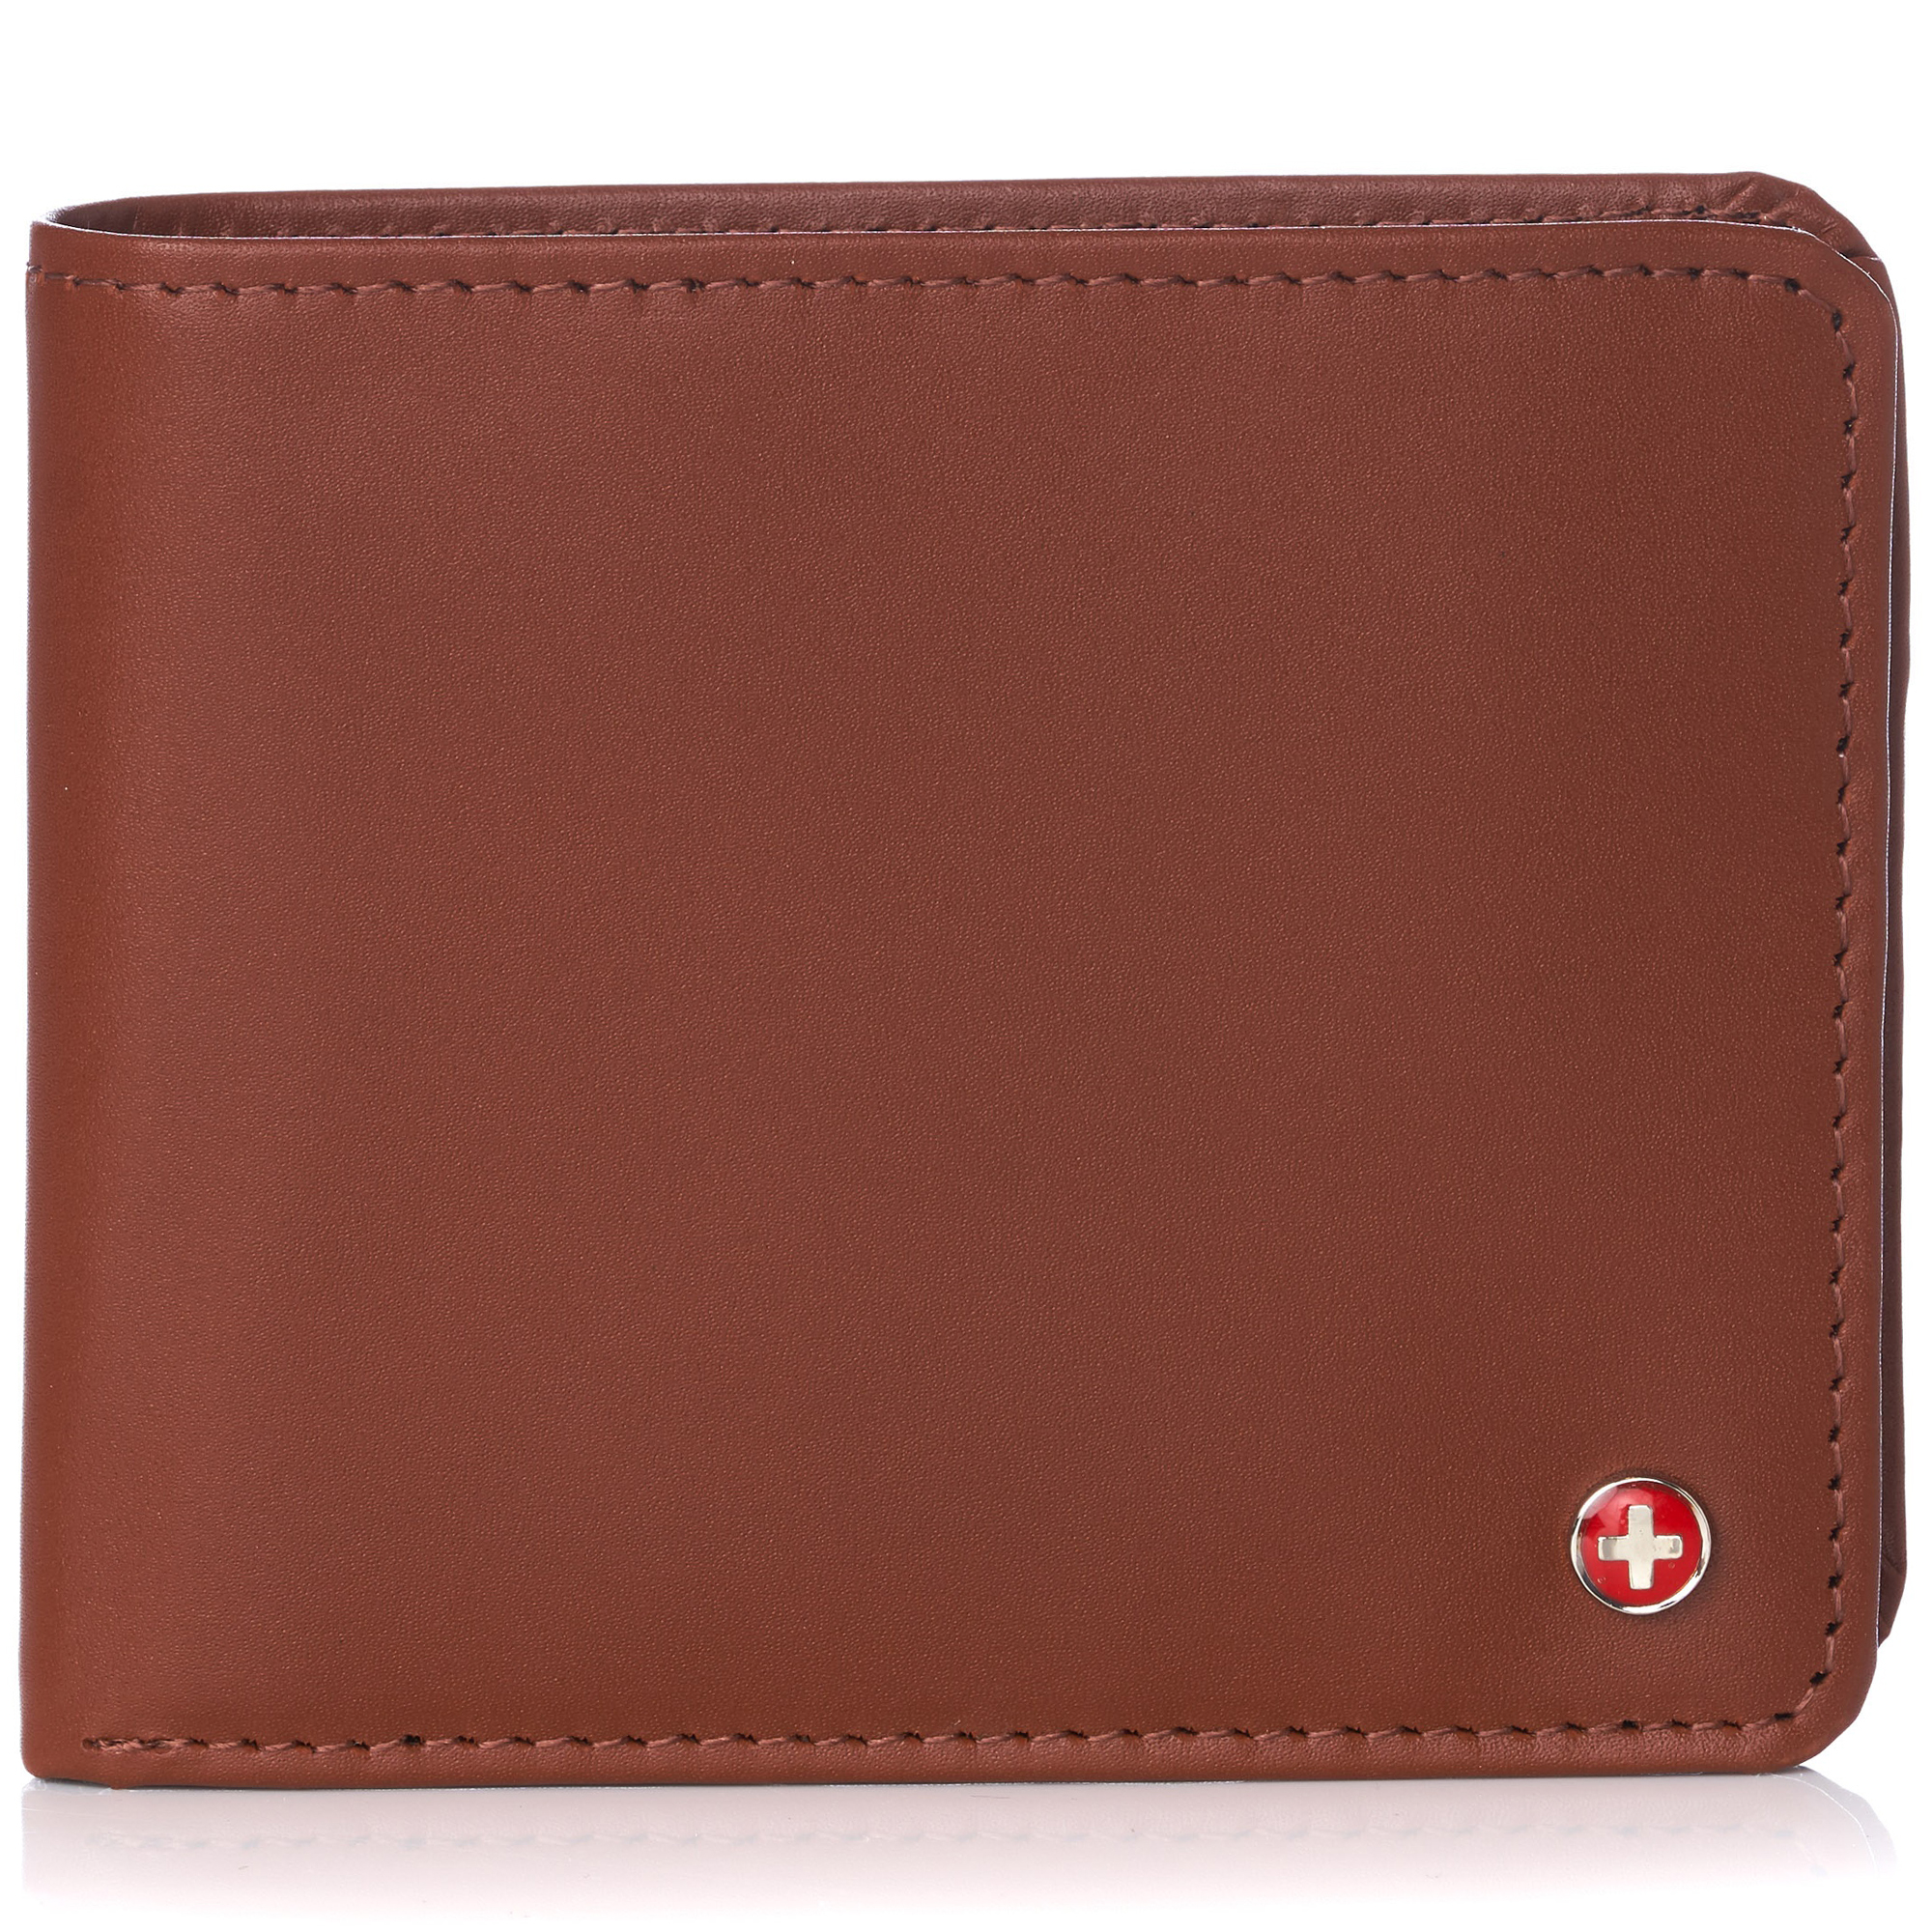 Alpine Swiss RFID Mens Wallet Deluxe Capacity Passcase Bifold Two Bill Sections - image 1 of 3